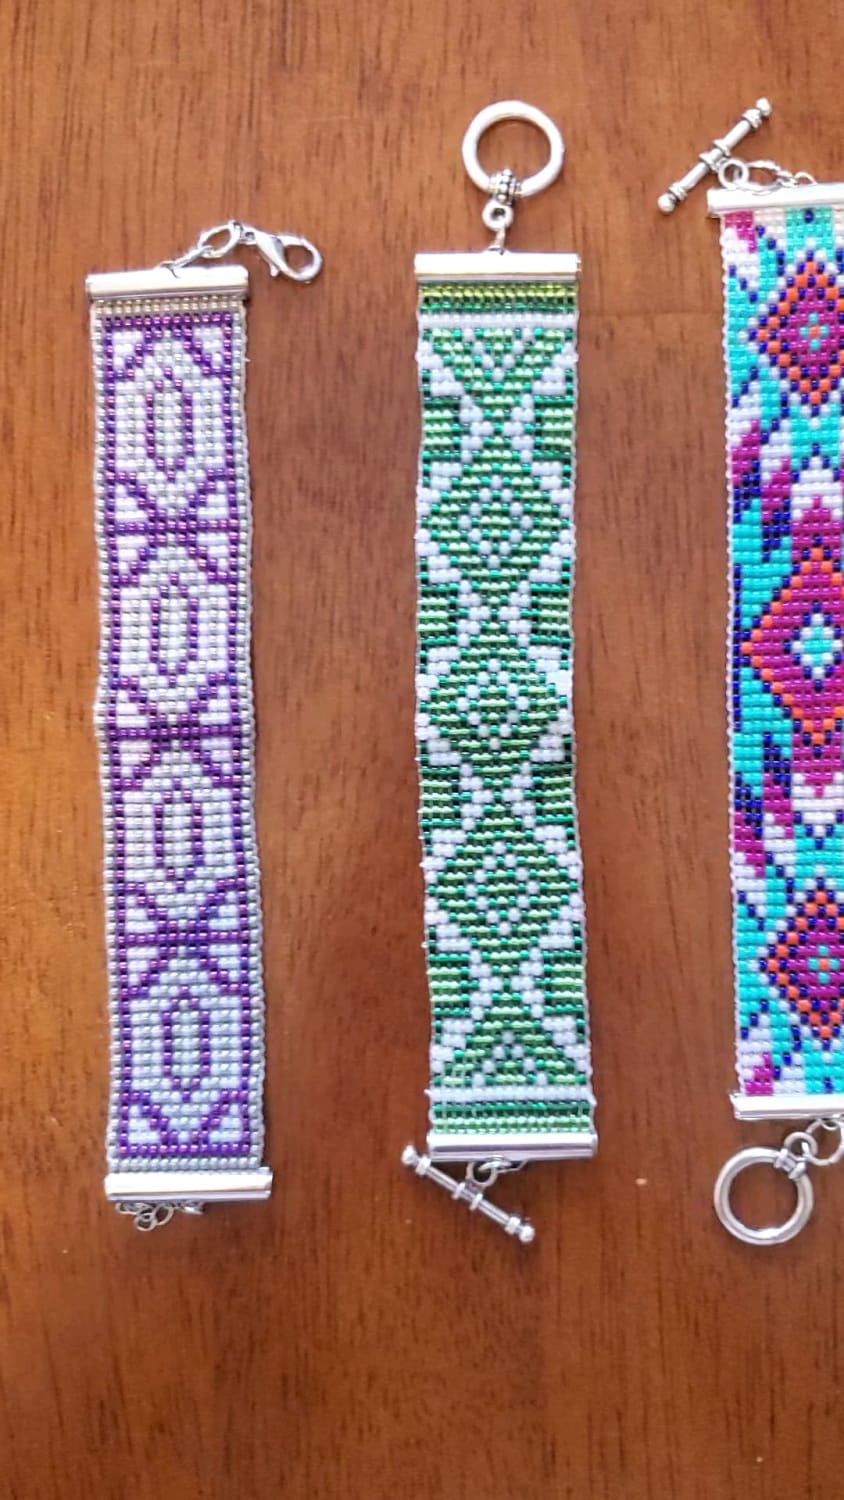 I bought my first beading loom this year and I'm happy with the progress I've made. These are all of the bracelets I've made in chronological order.